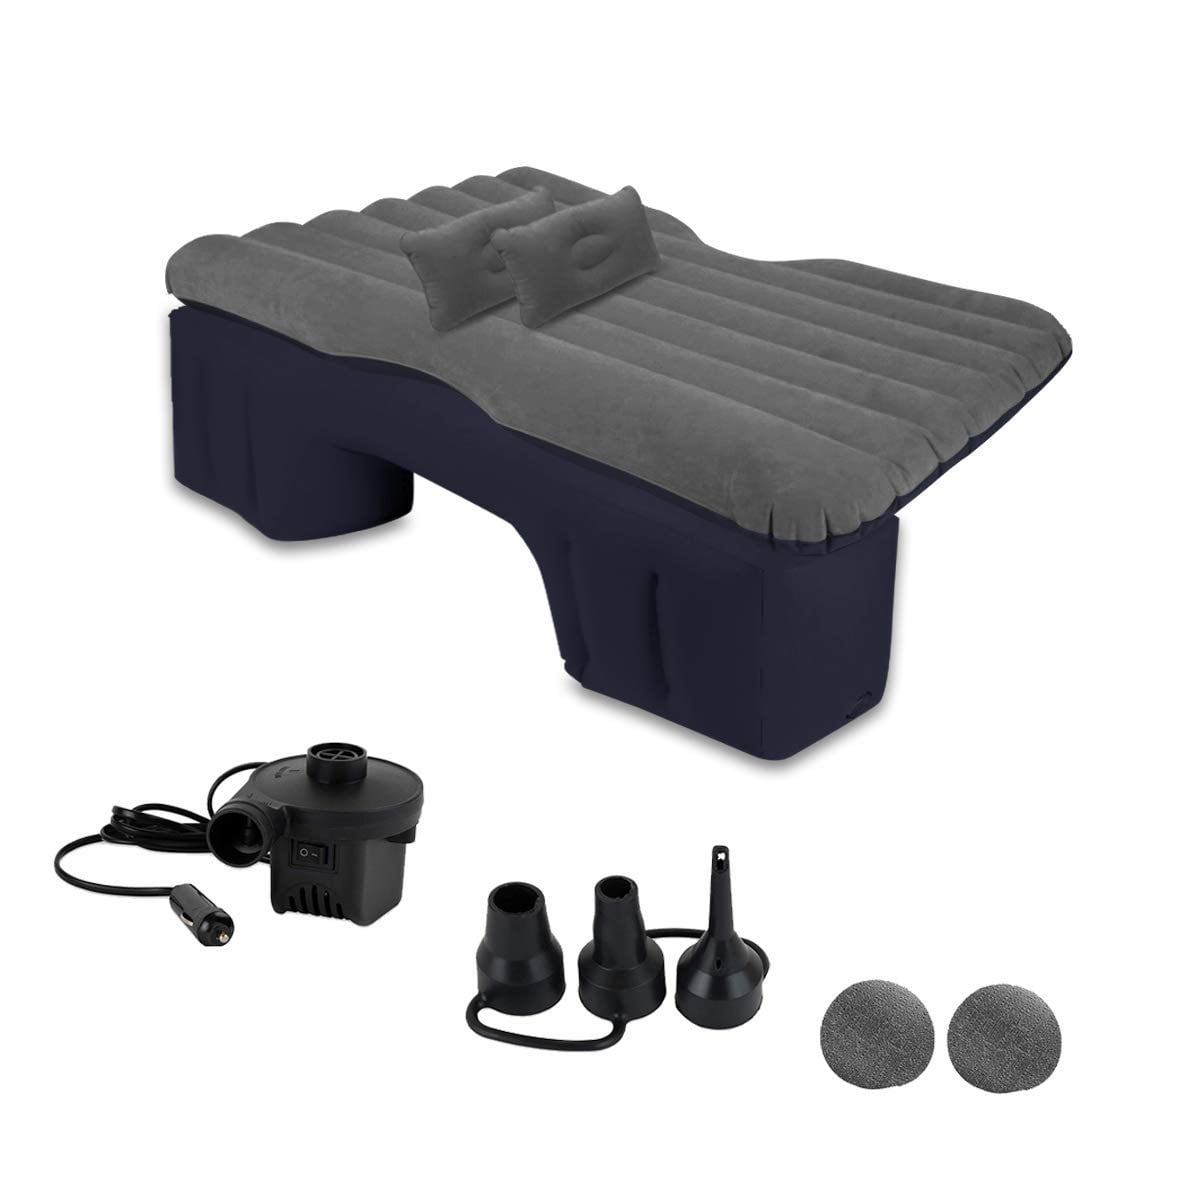 Car Travel Inflatable Air Mattress Back Seat - Zone Tech Car Bed 